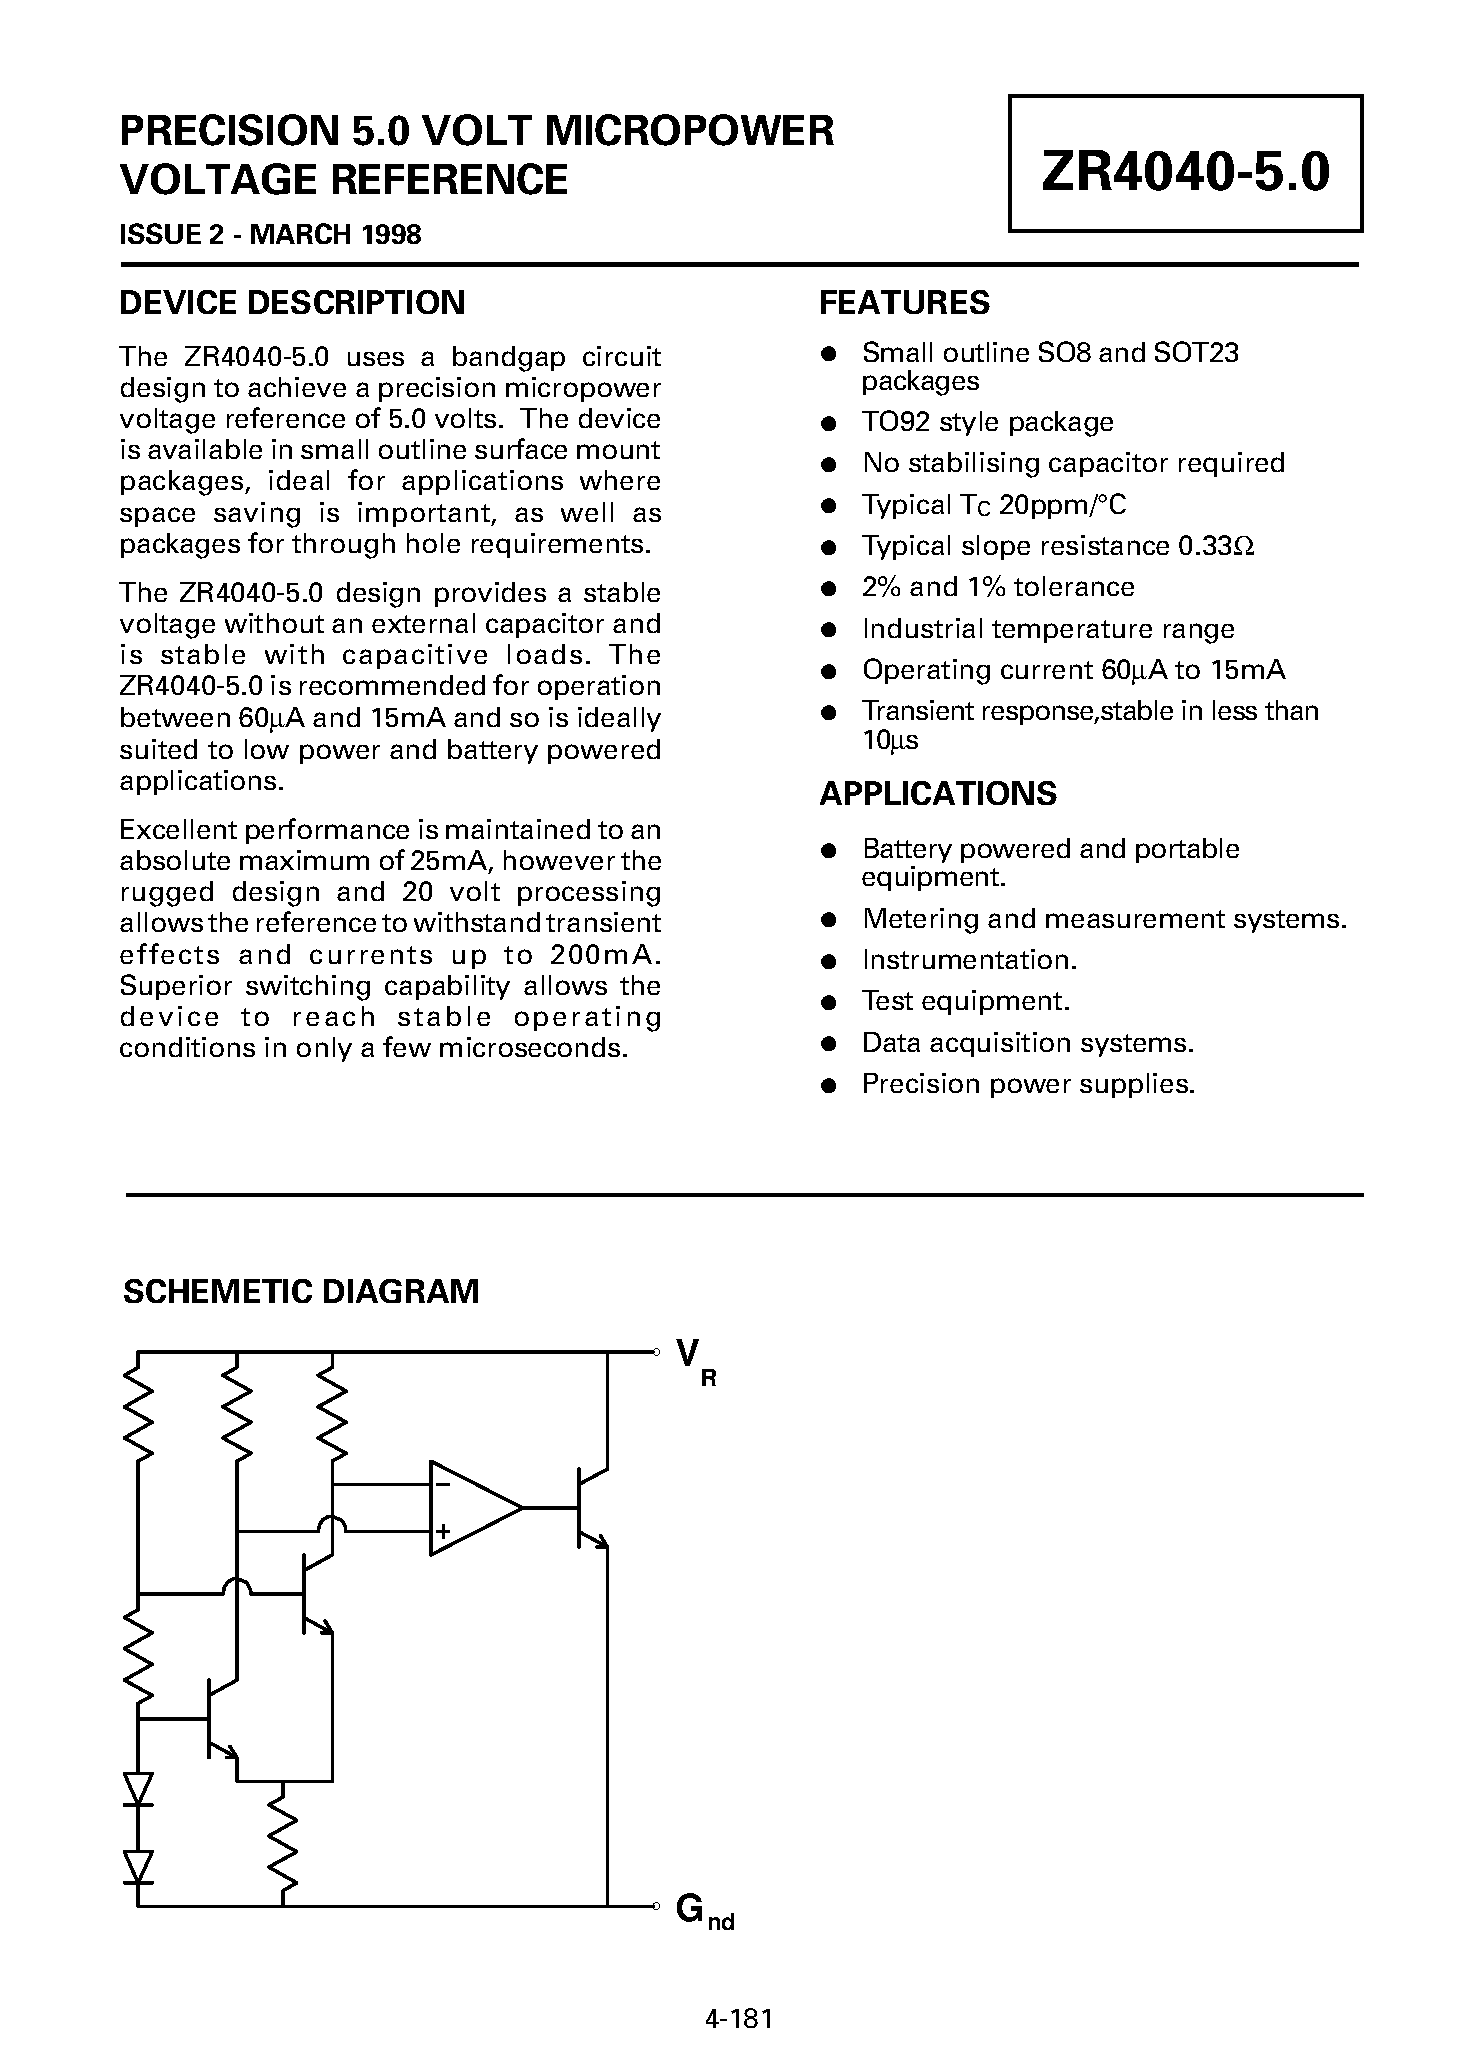 Datasheet ZR40401N850 - PRECISION 5.0 VOLT MICROPOWER VOLTAGE REFERENCE page 1